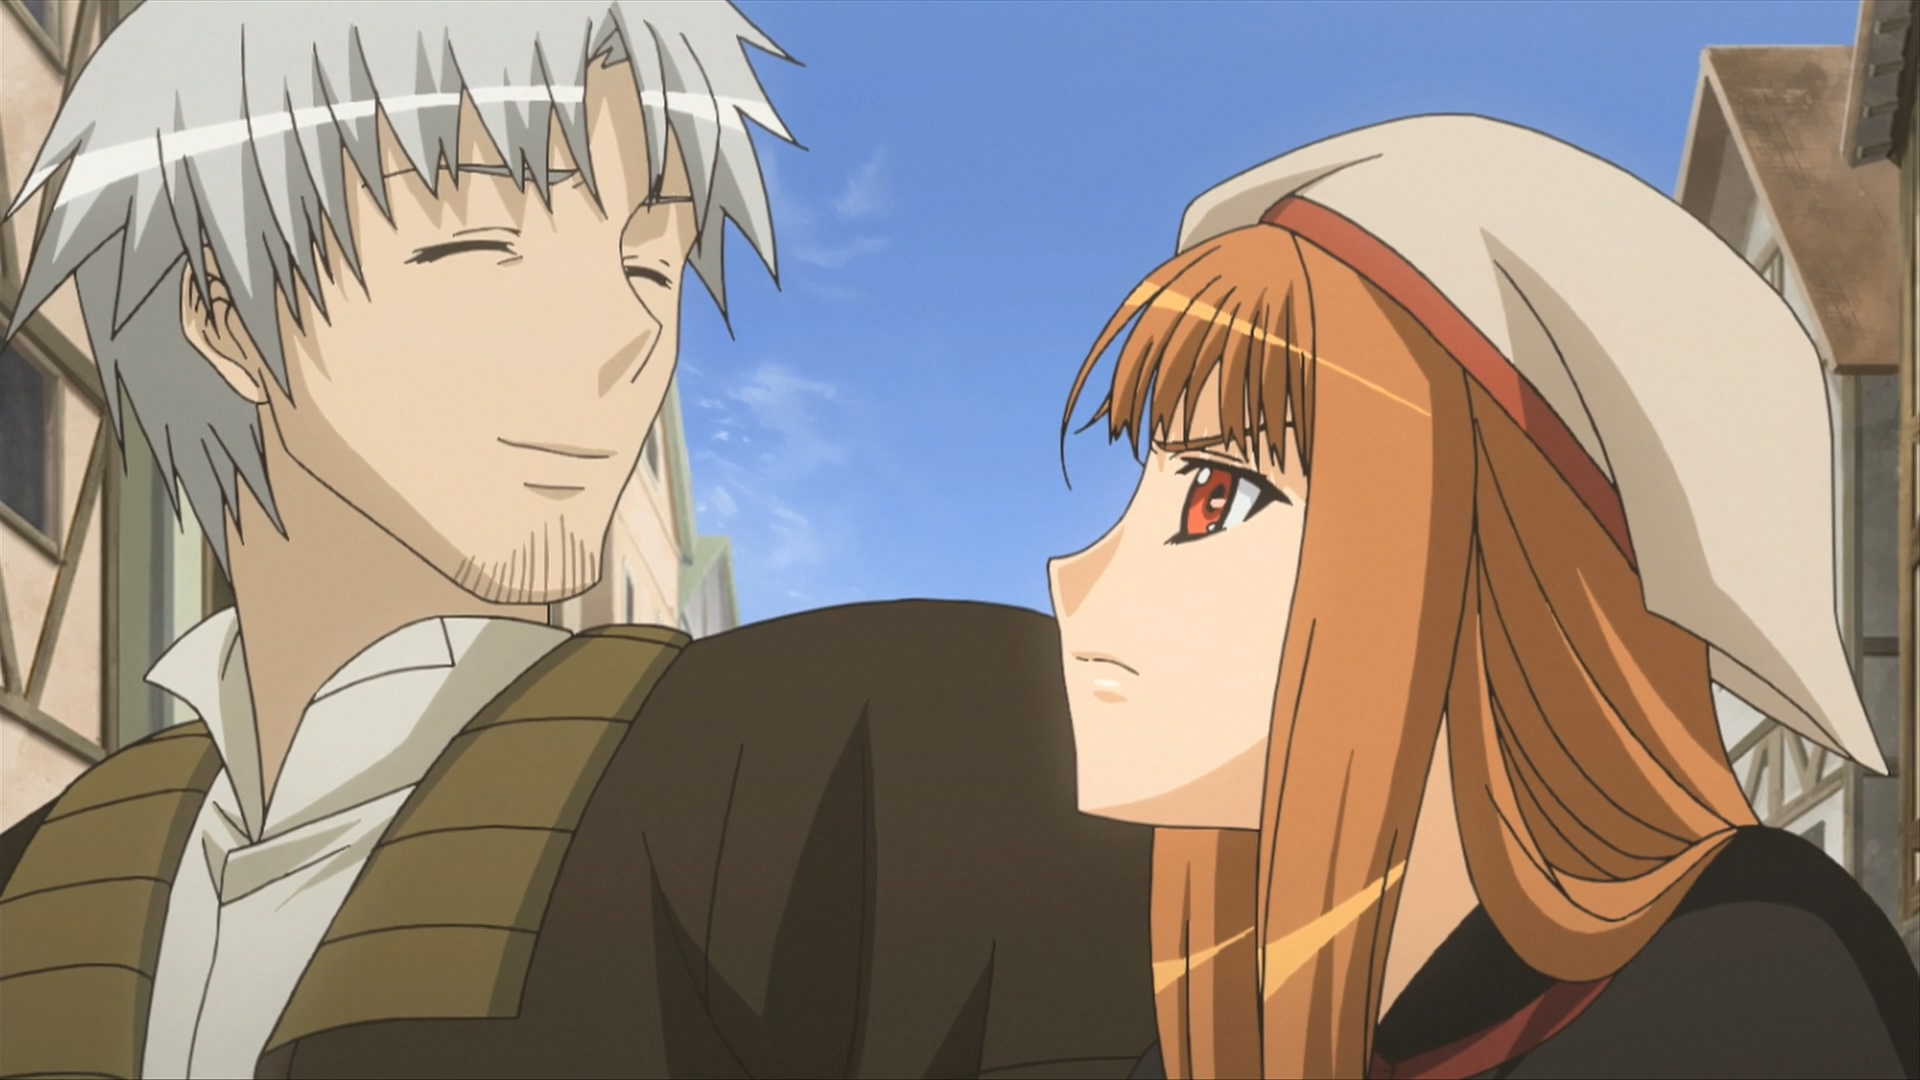 Spice and Wolf  Announcement Teaser  Anime  YouTube